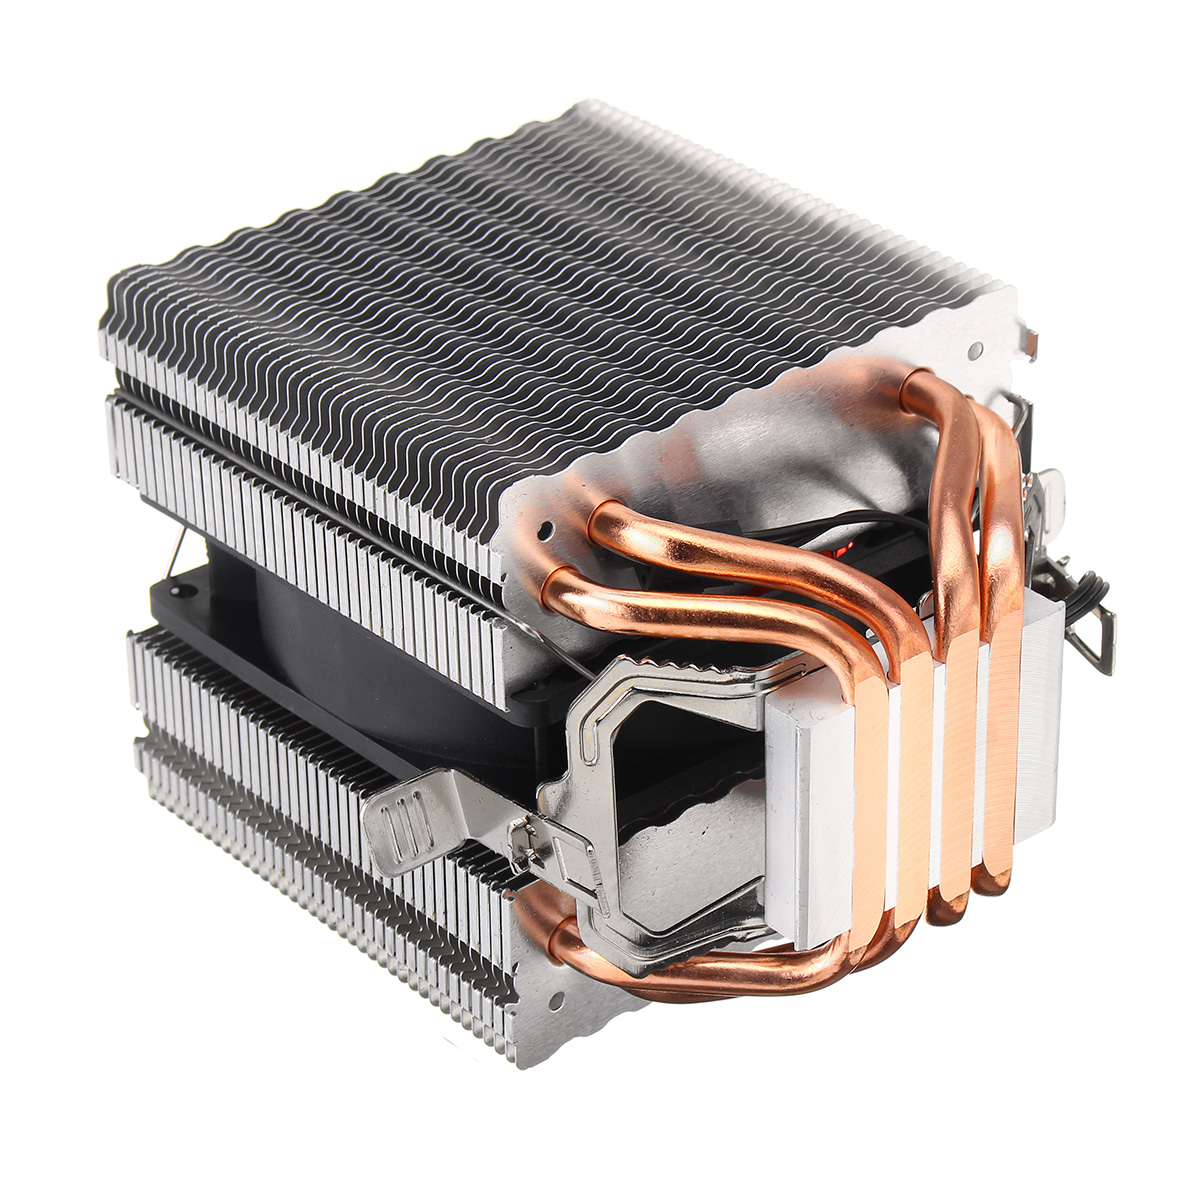 Find 3 Pin Four Copper Pipes Red Backlit CPU Cooling Fan for Intel 1155 1156 AMD for Sale on Gipsybee.com with cryptocurrencies